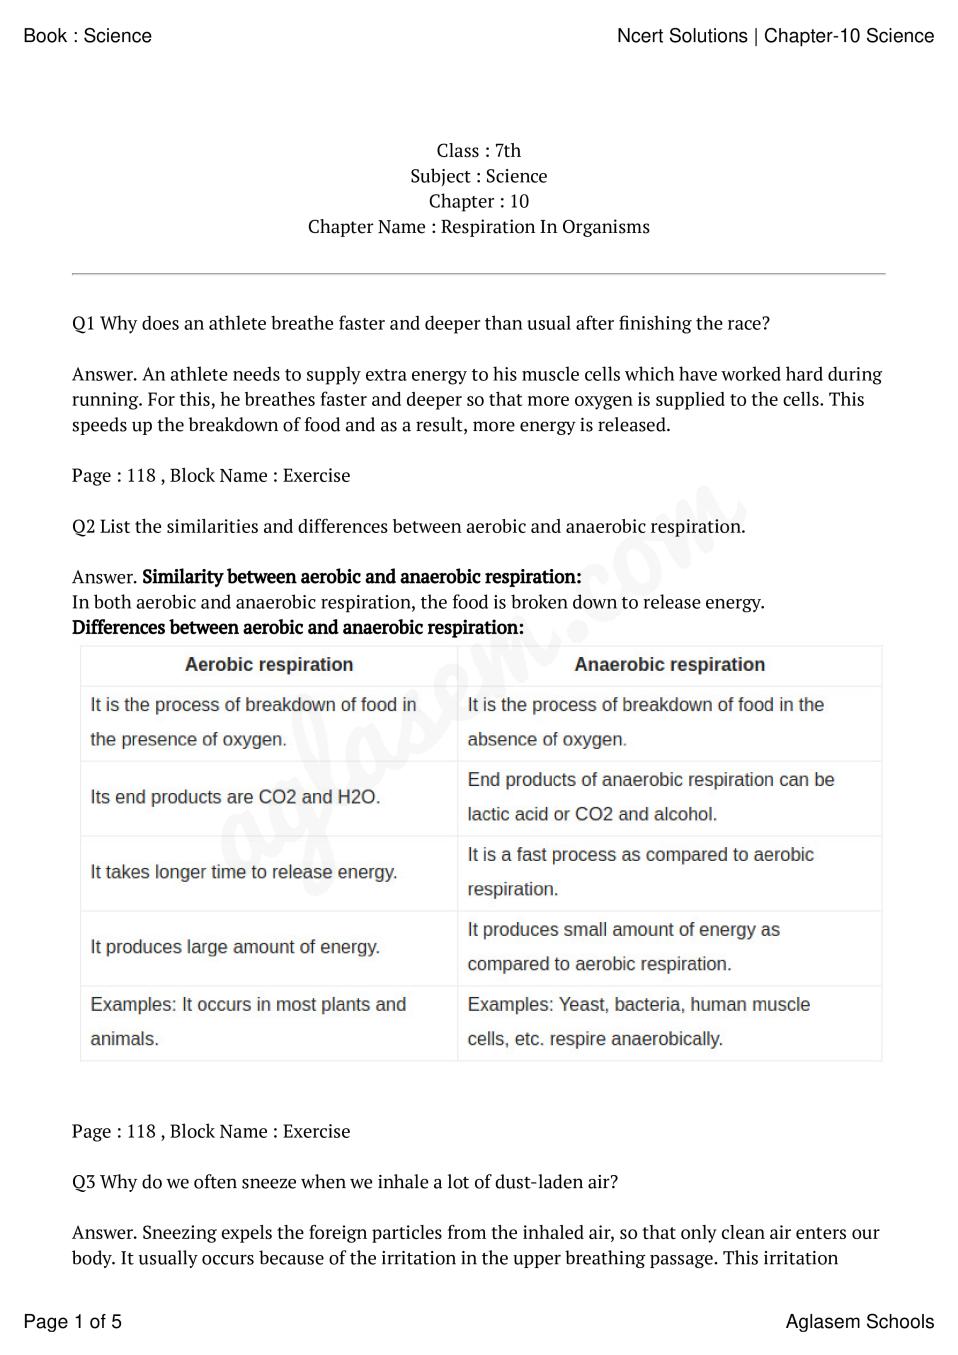 NCERT Solutions for Class 7 Science Chapter 10 Respiration In Organisms